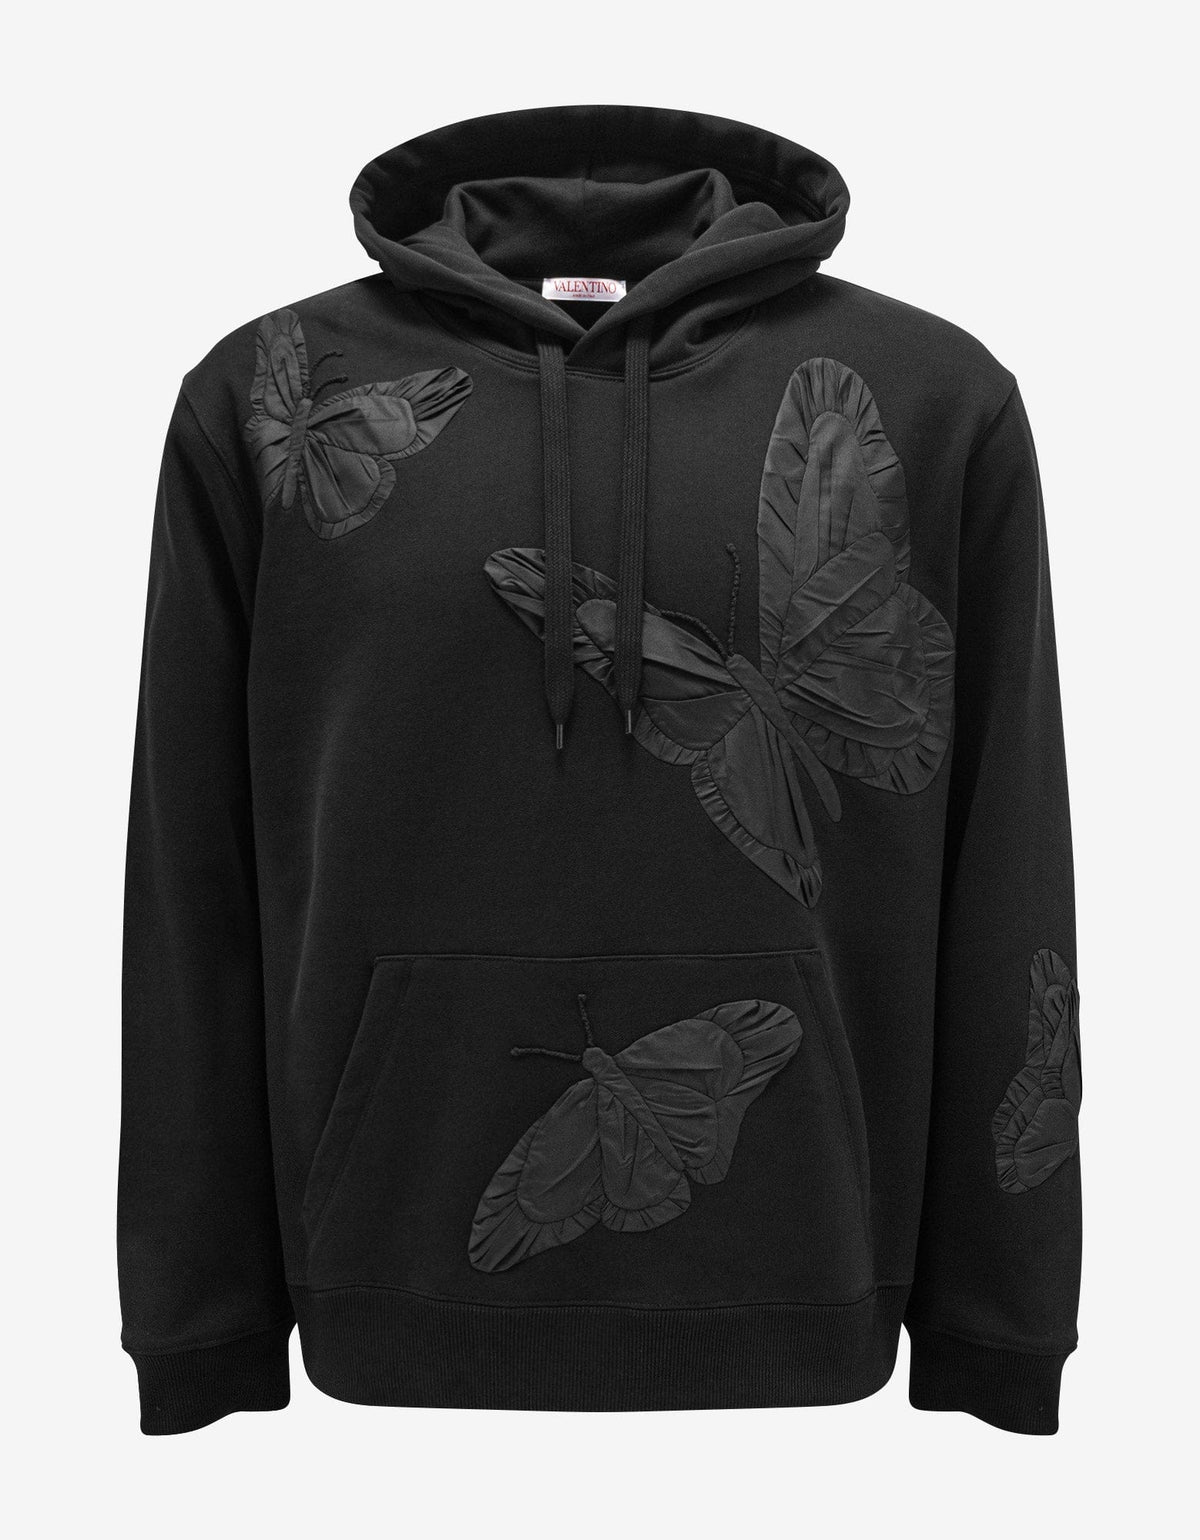 Valentino Black Butterfly Applique Hoodie